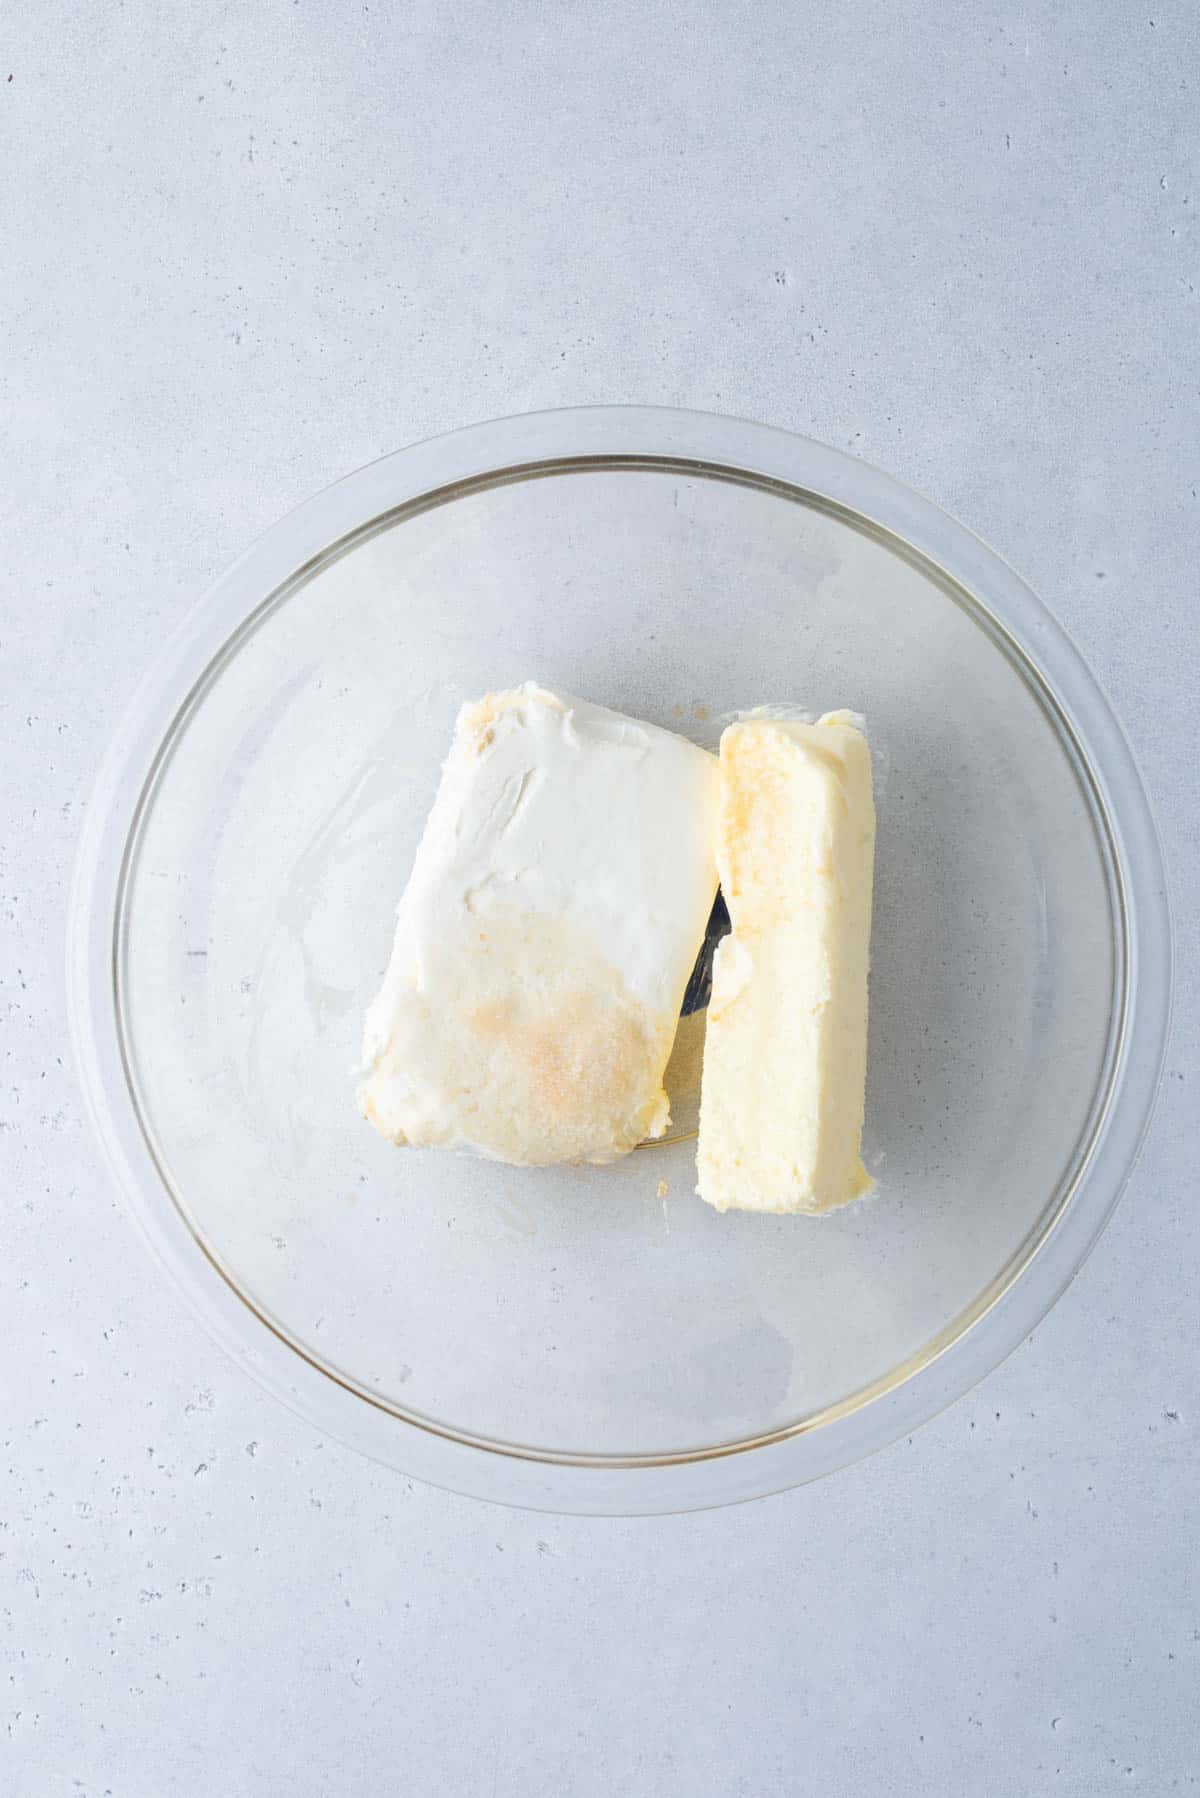 cream cheese and a stick of butter in a clear glass bowl on a white surface